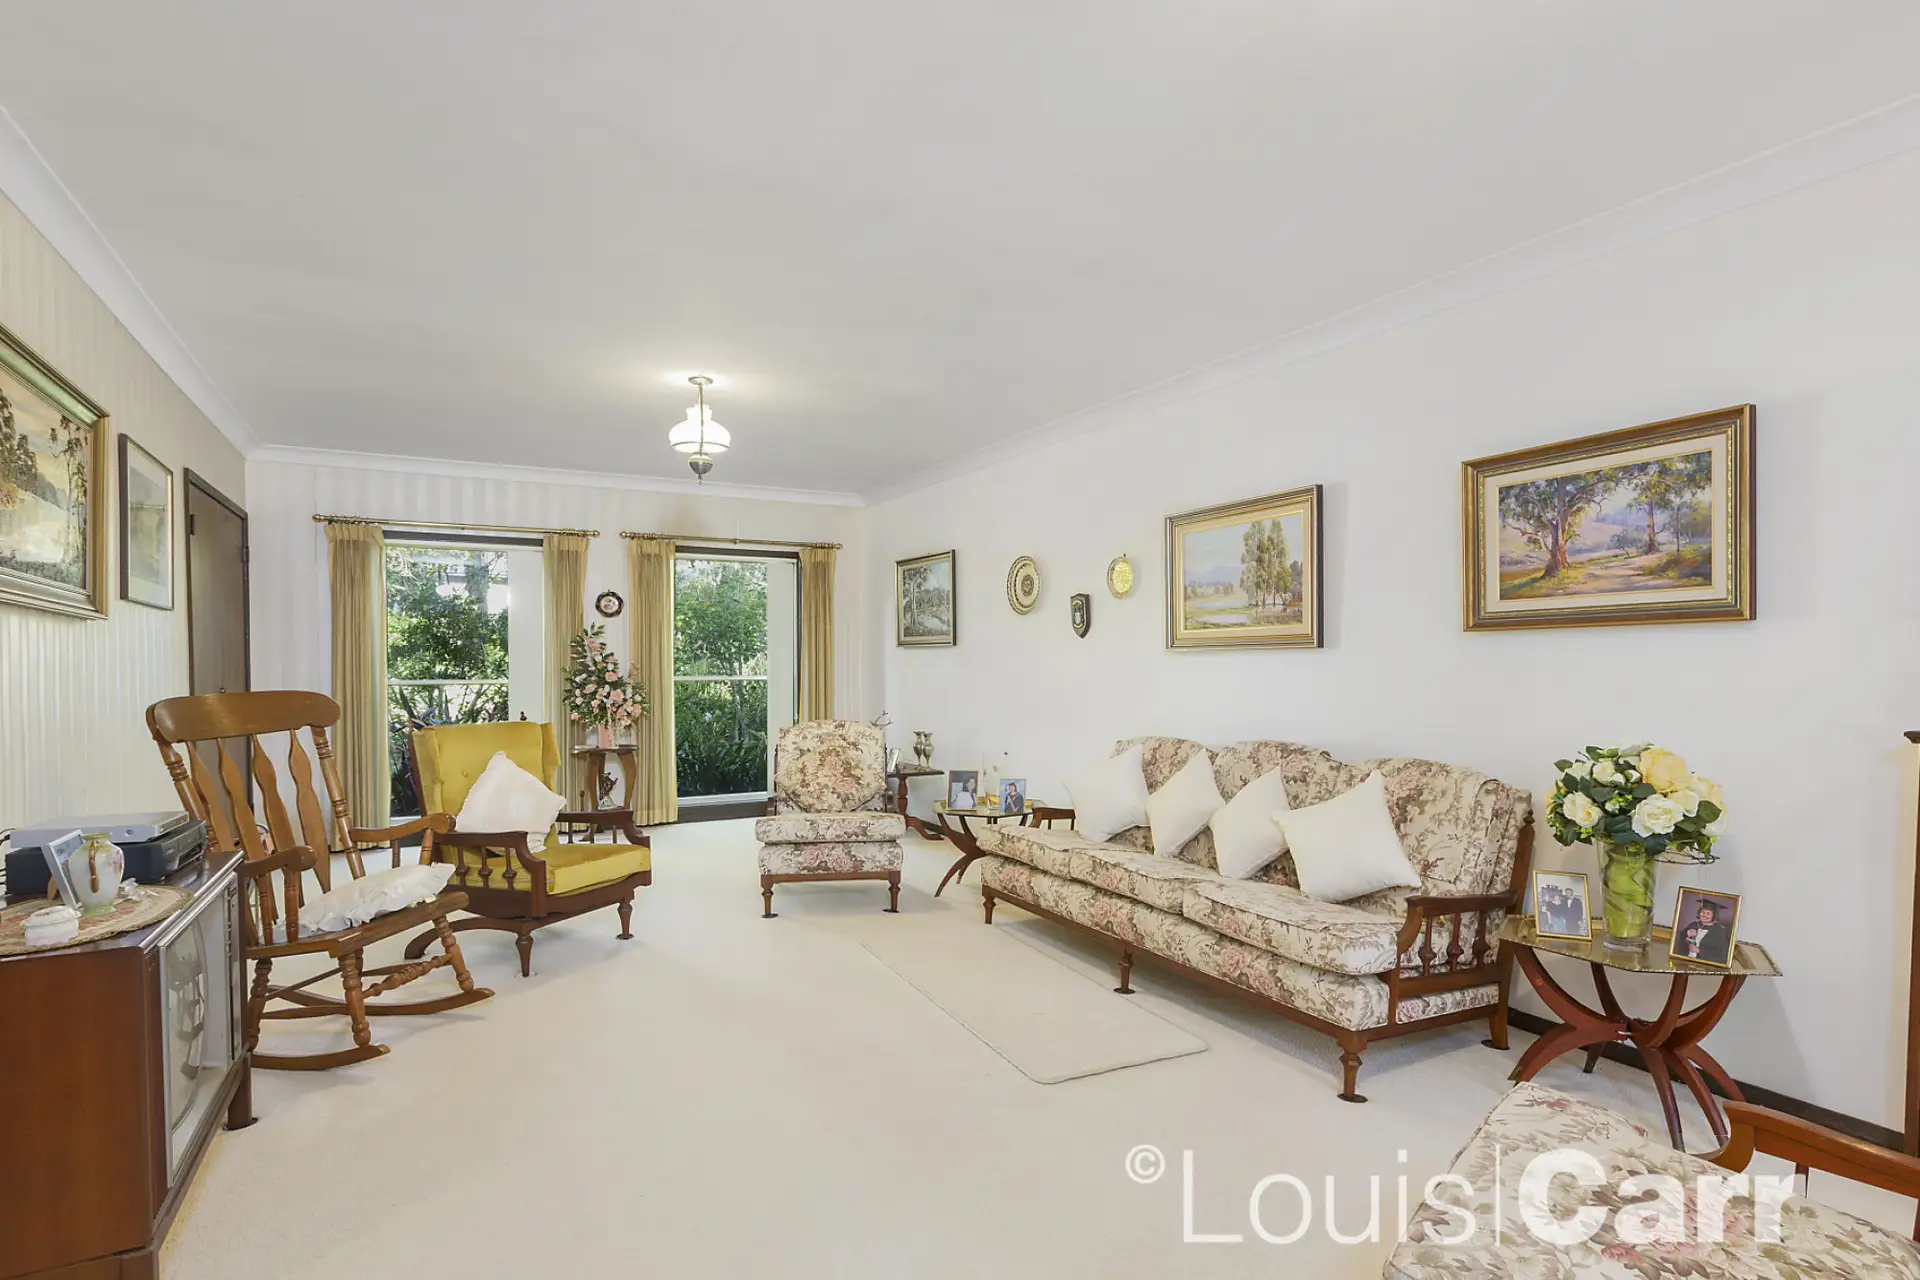 Photo #5: 8-10 Yanderra Grove, Cherrybrook - Sold by Louis Carr Real Estate